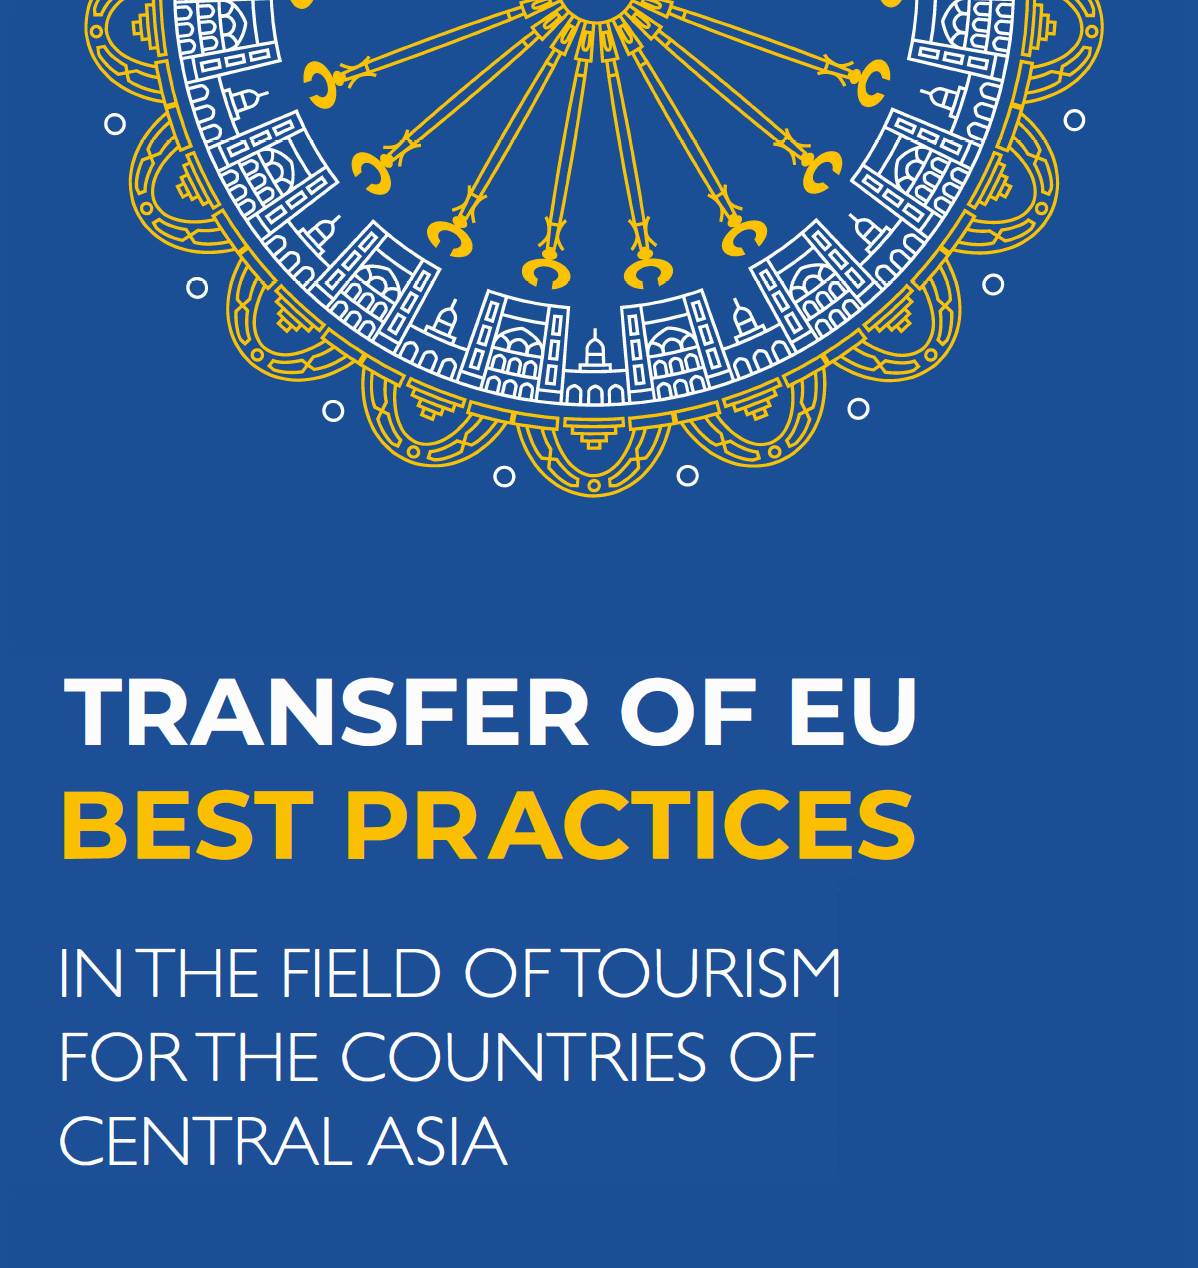 Transfer of EU Best Practices in the Field of Tourism for the Countries of Central Asia